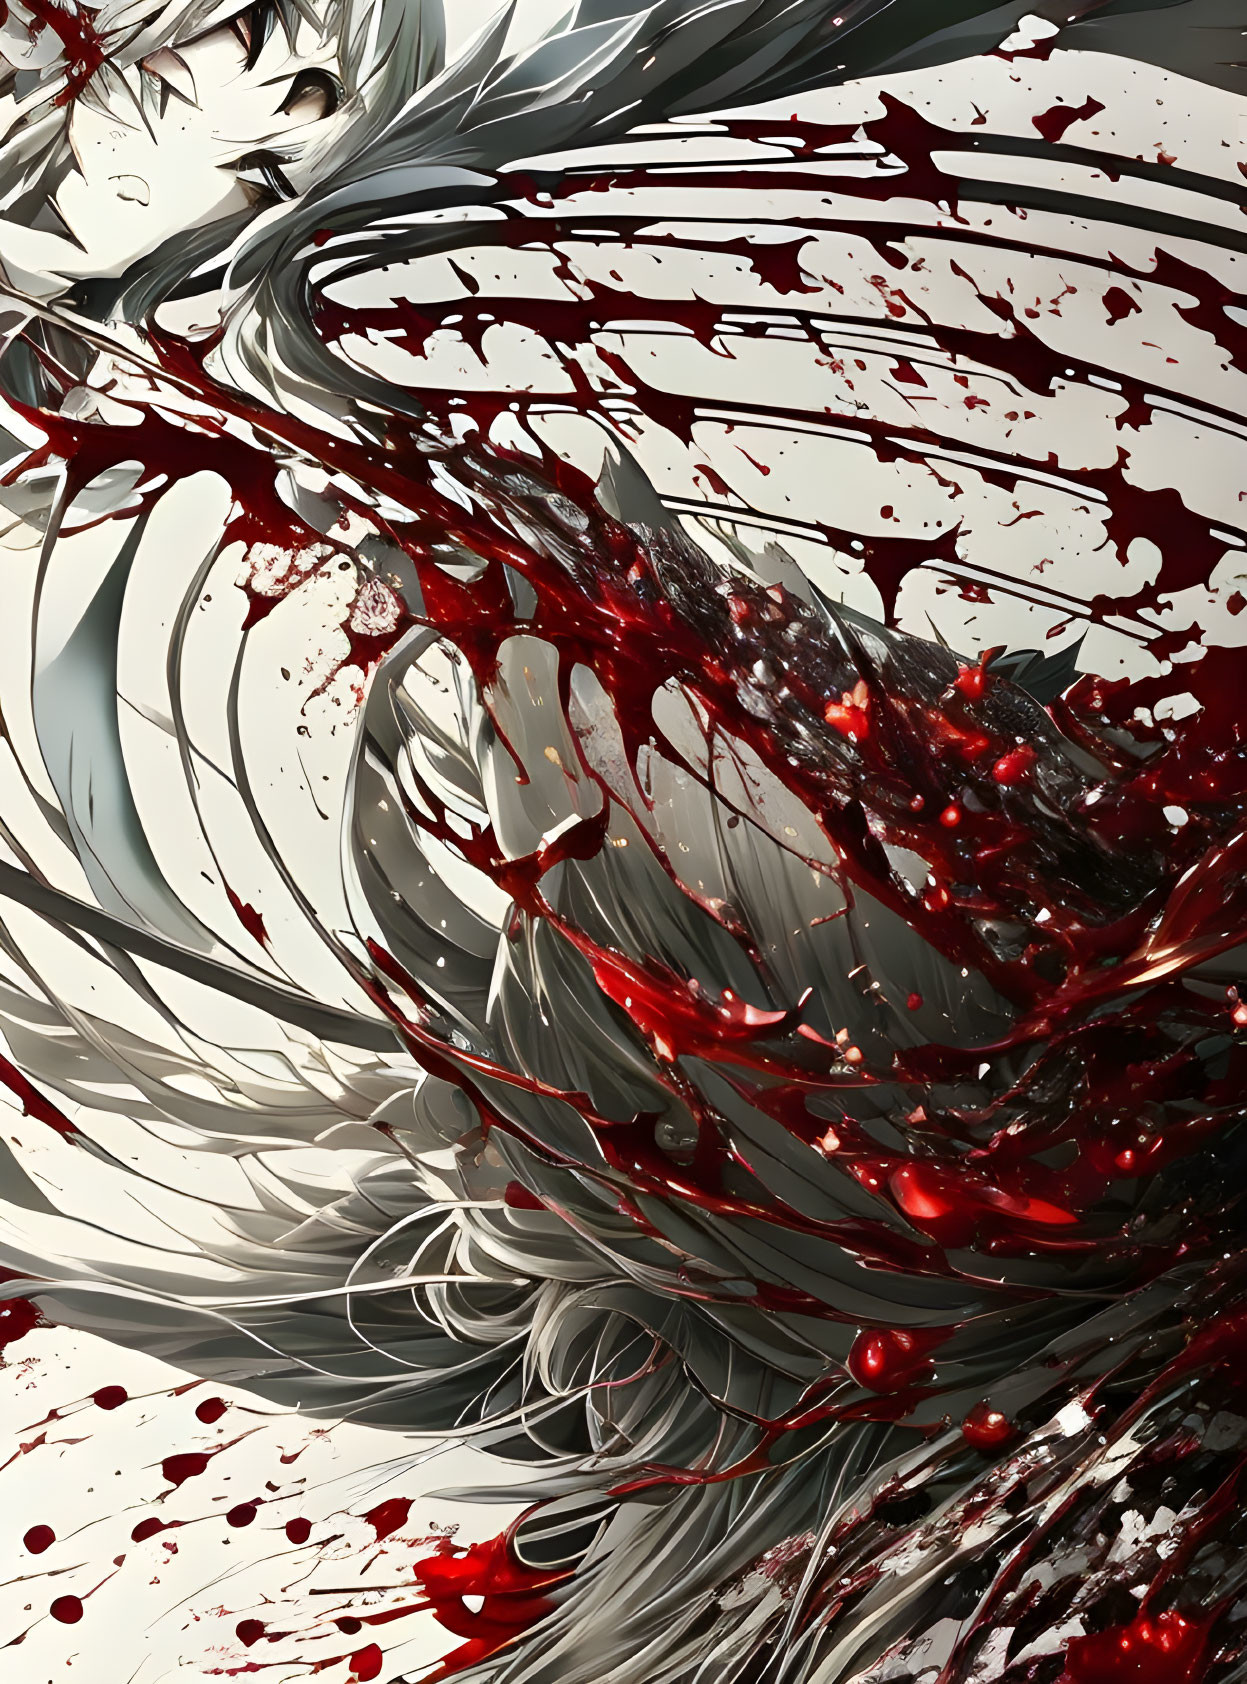 Winged Entity with Feathers and Red Splashes in Artistic Rendering